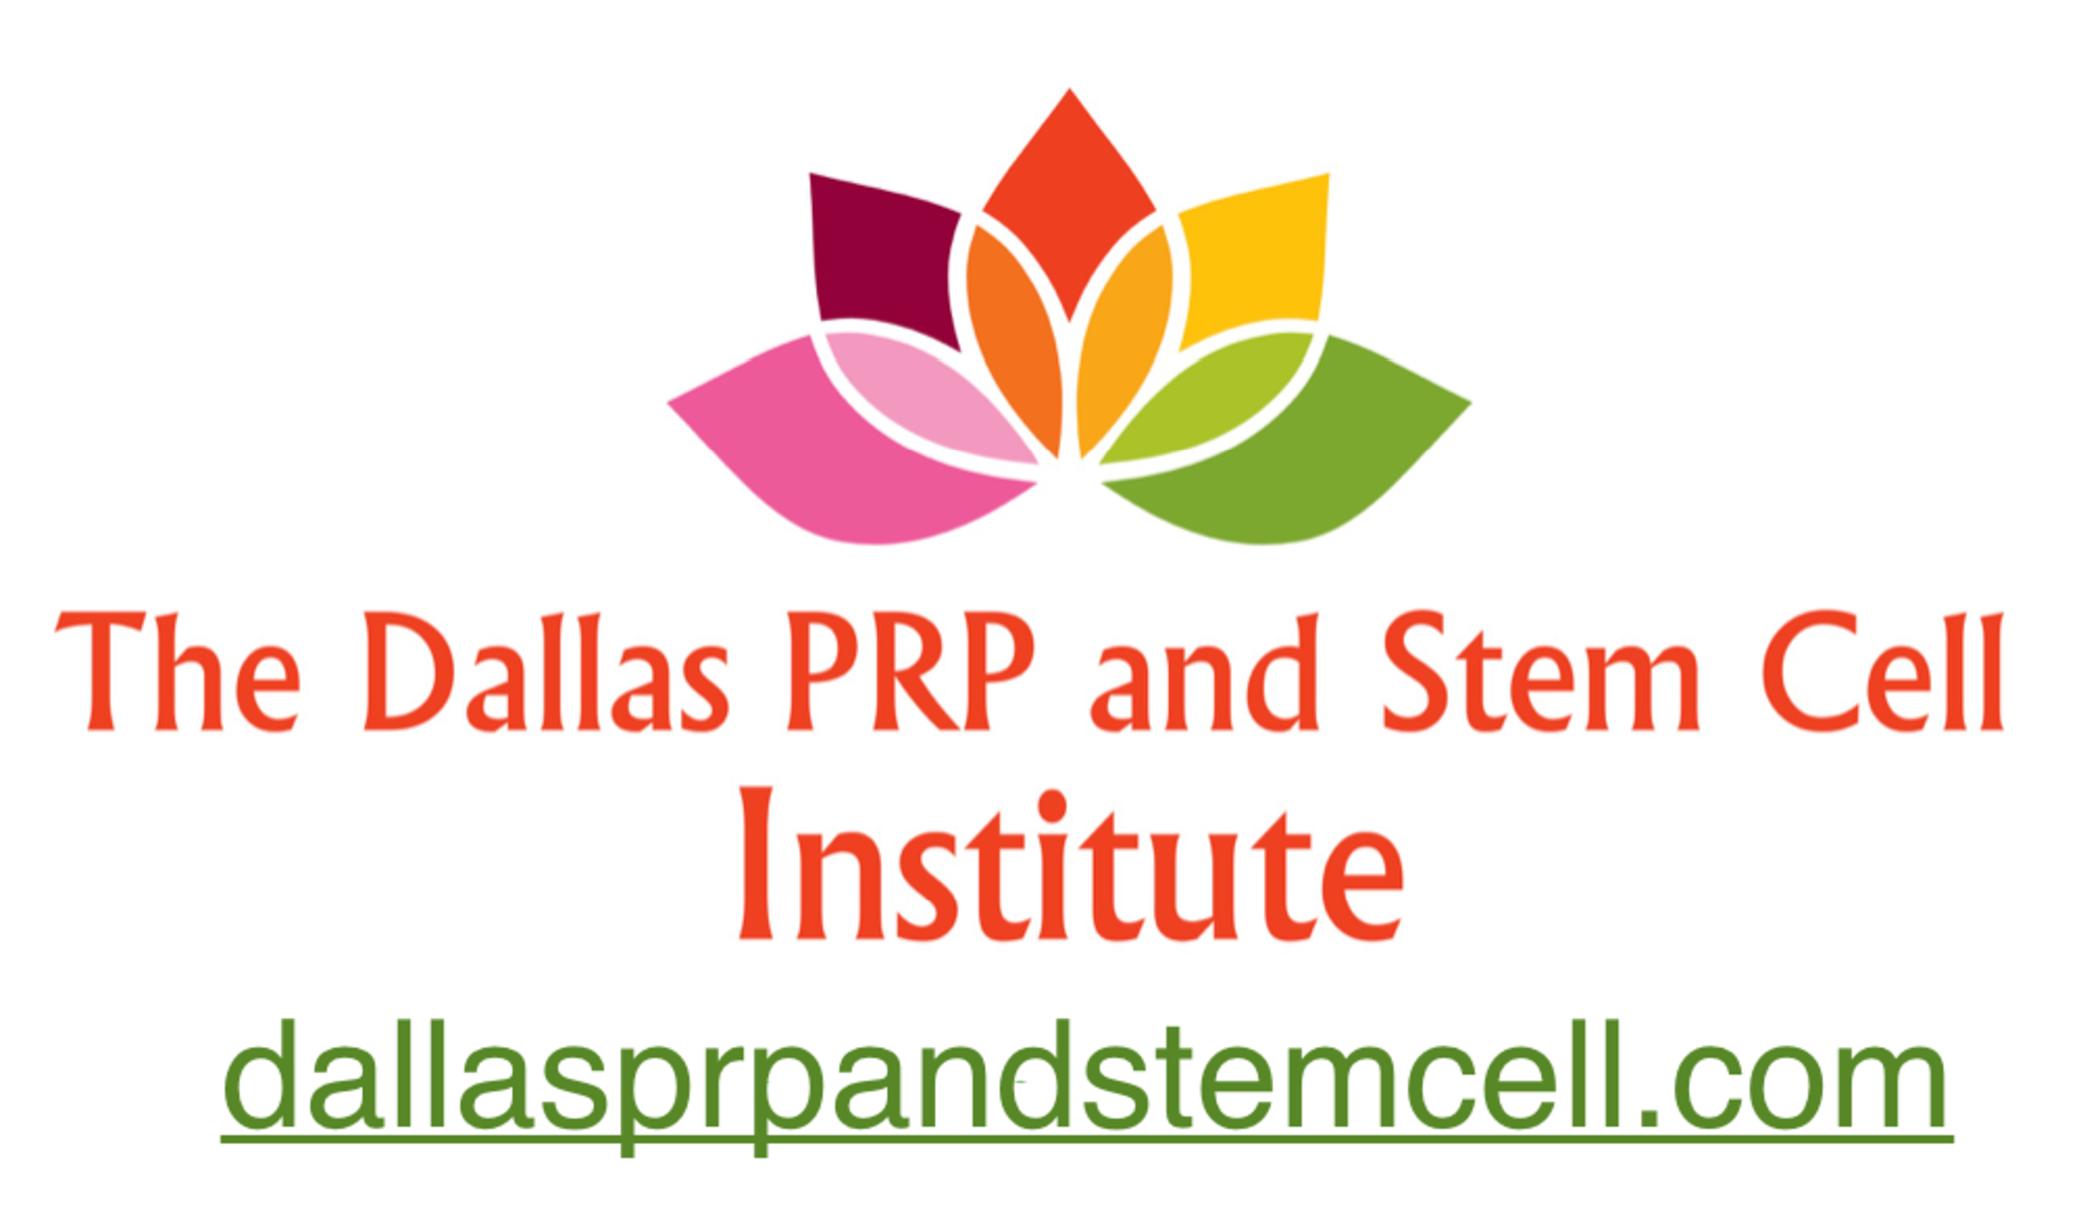 Dallas PRP and Stem Cell Institute